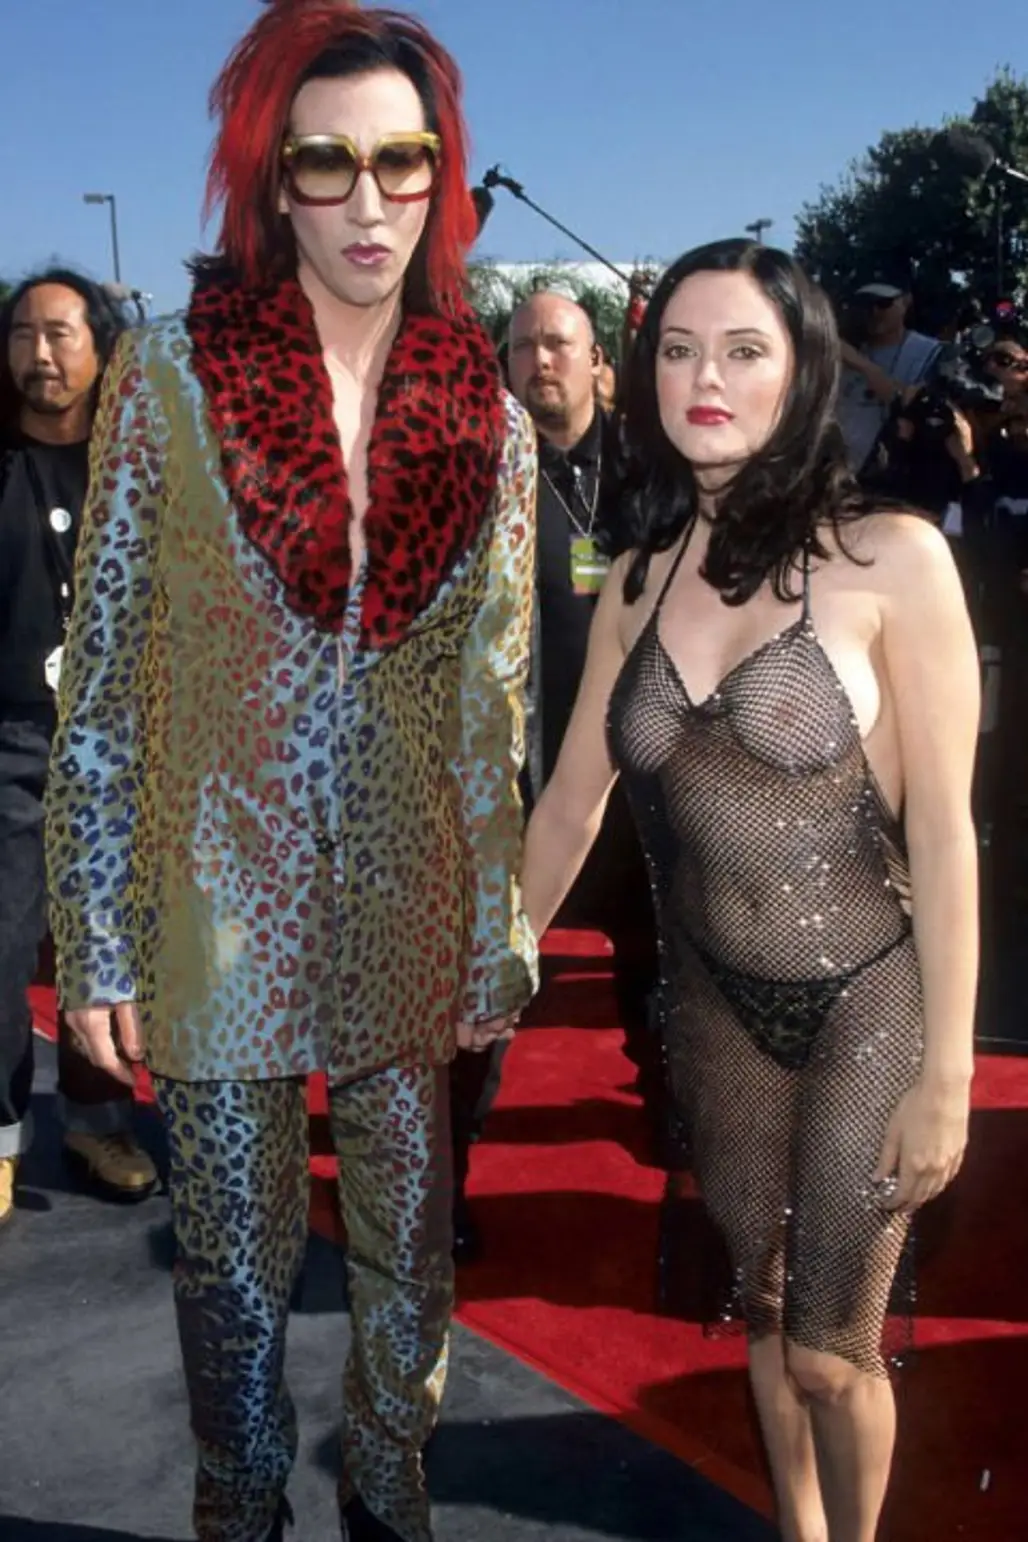 And Last but Not Least...Rose McGowan at the 1998 MTV Video Music Awards